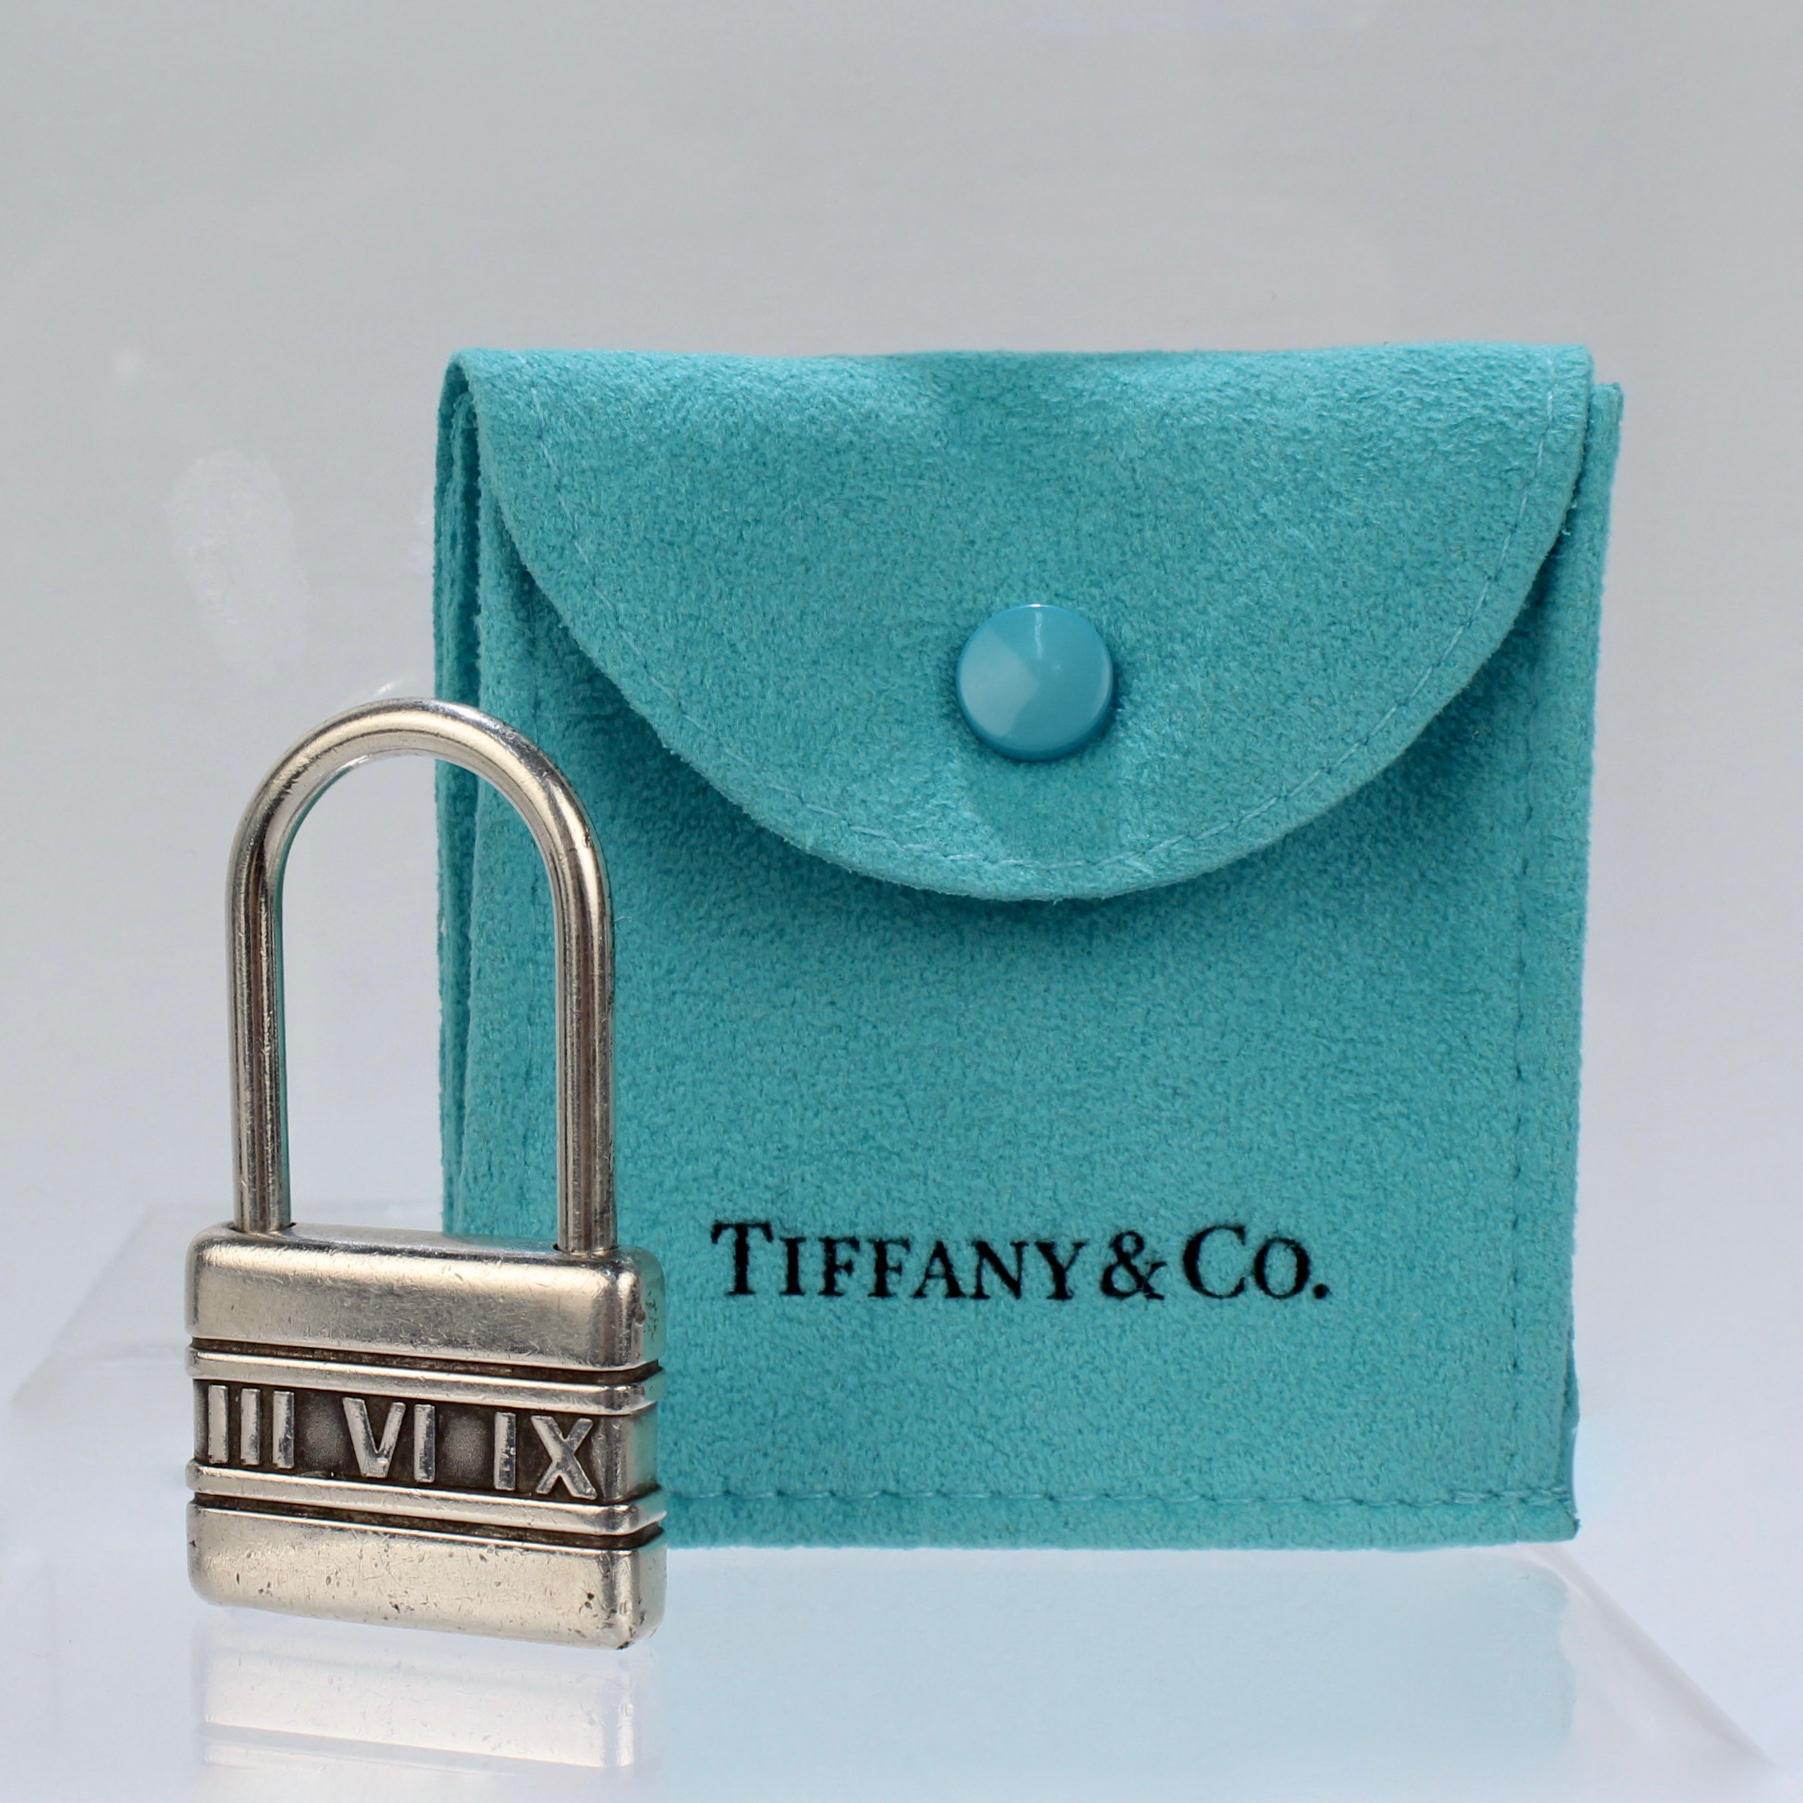 A very fine vintage Tiffany & Co. Atlas lock-shaped key holder or keychain.

In sterling silver.

Simply a great Tiffany & Co. everyday piece!

Date:
Late 20th Century

Condition:
It is in overall fair, as-pictured, used estate condition.

Condition